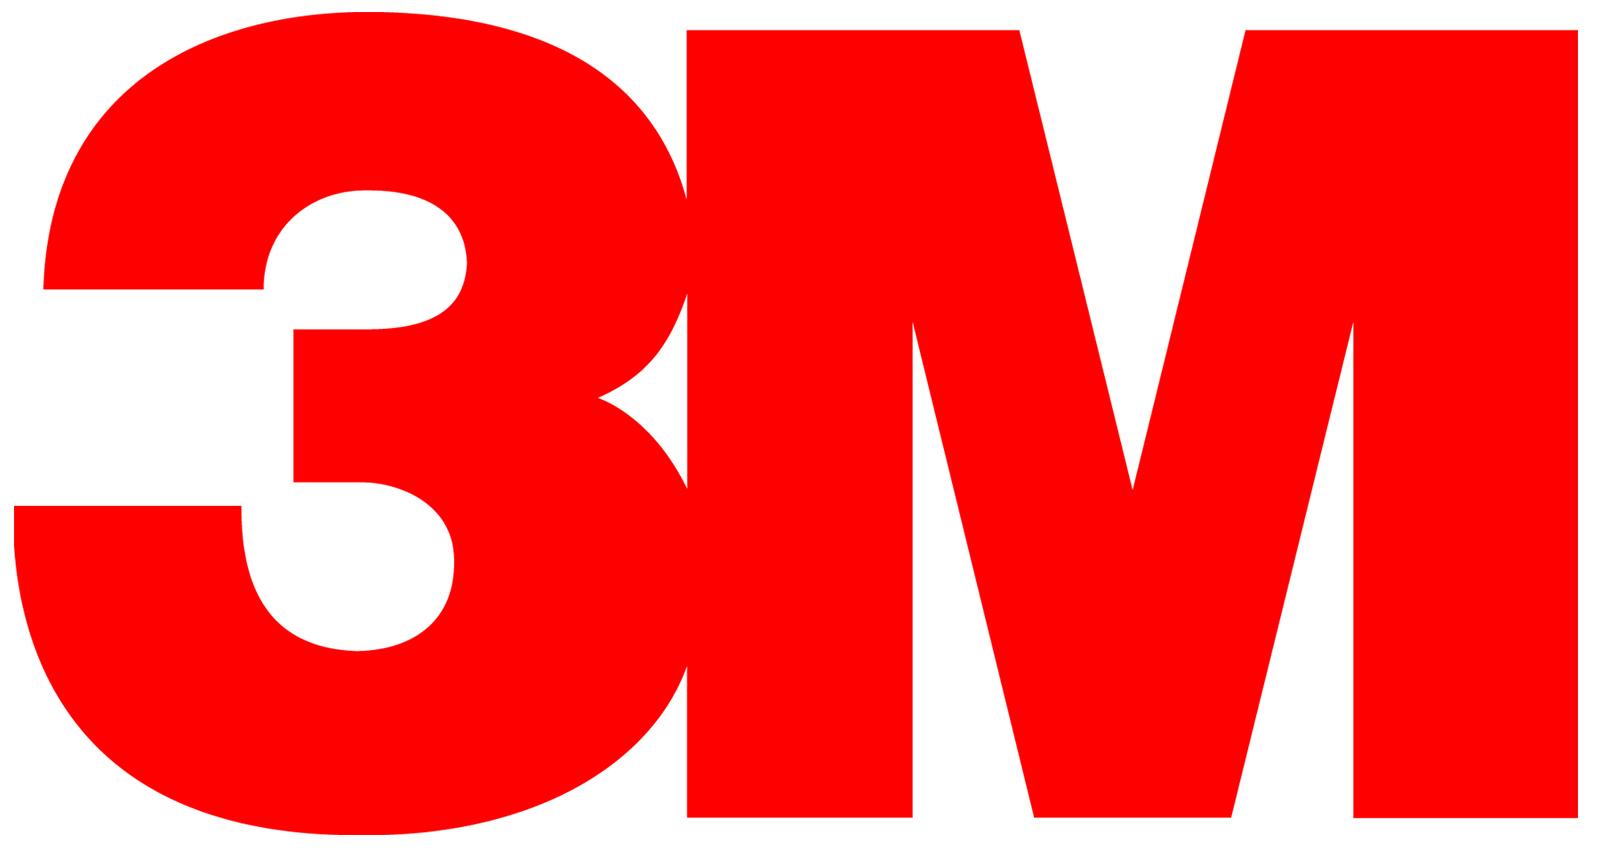 3M Company Pursuing Outperformance With Operational Excellence And